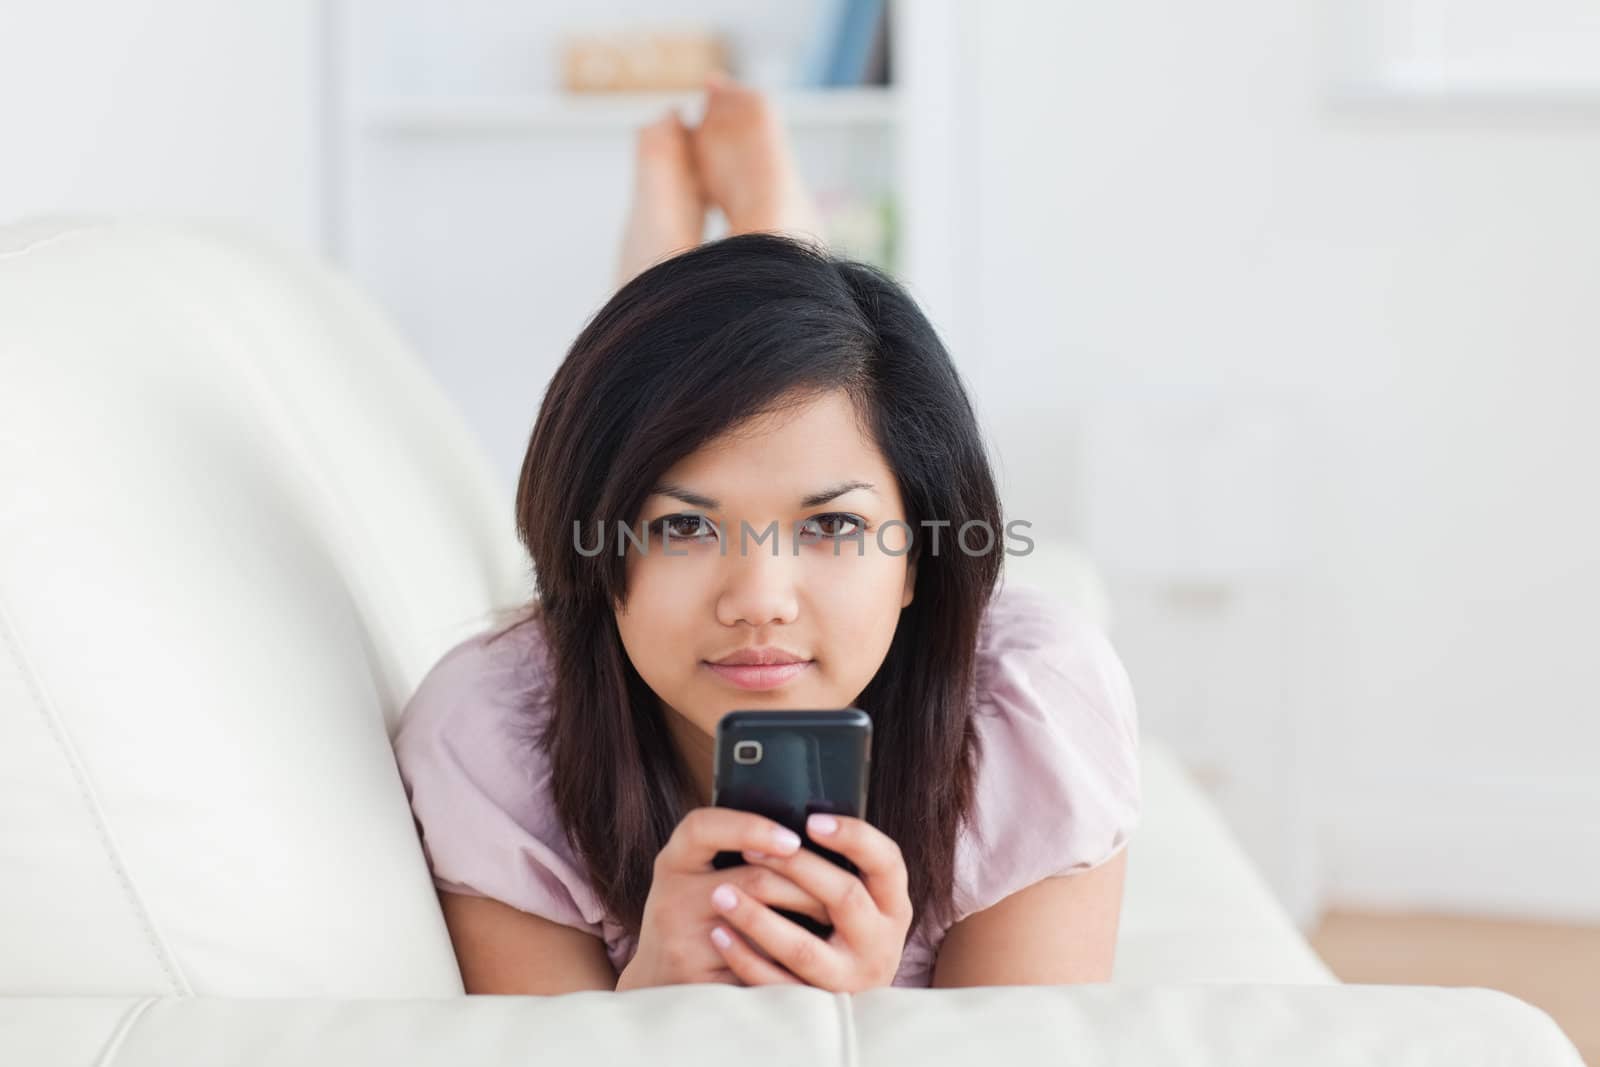 Woman resting on a couch while holding a telephone in a living room